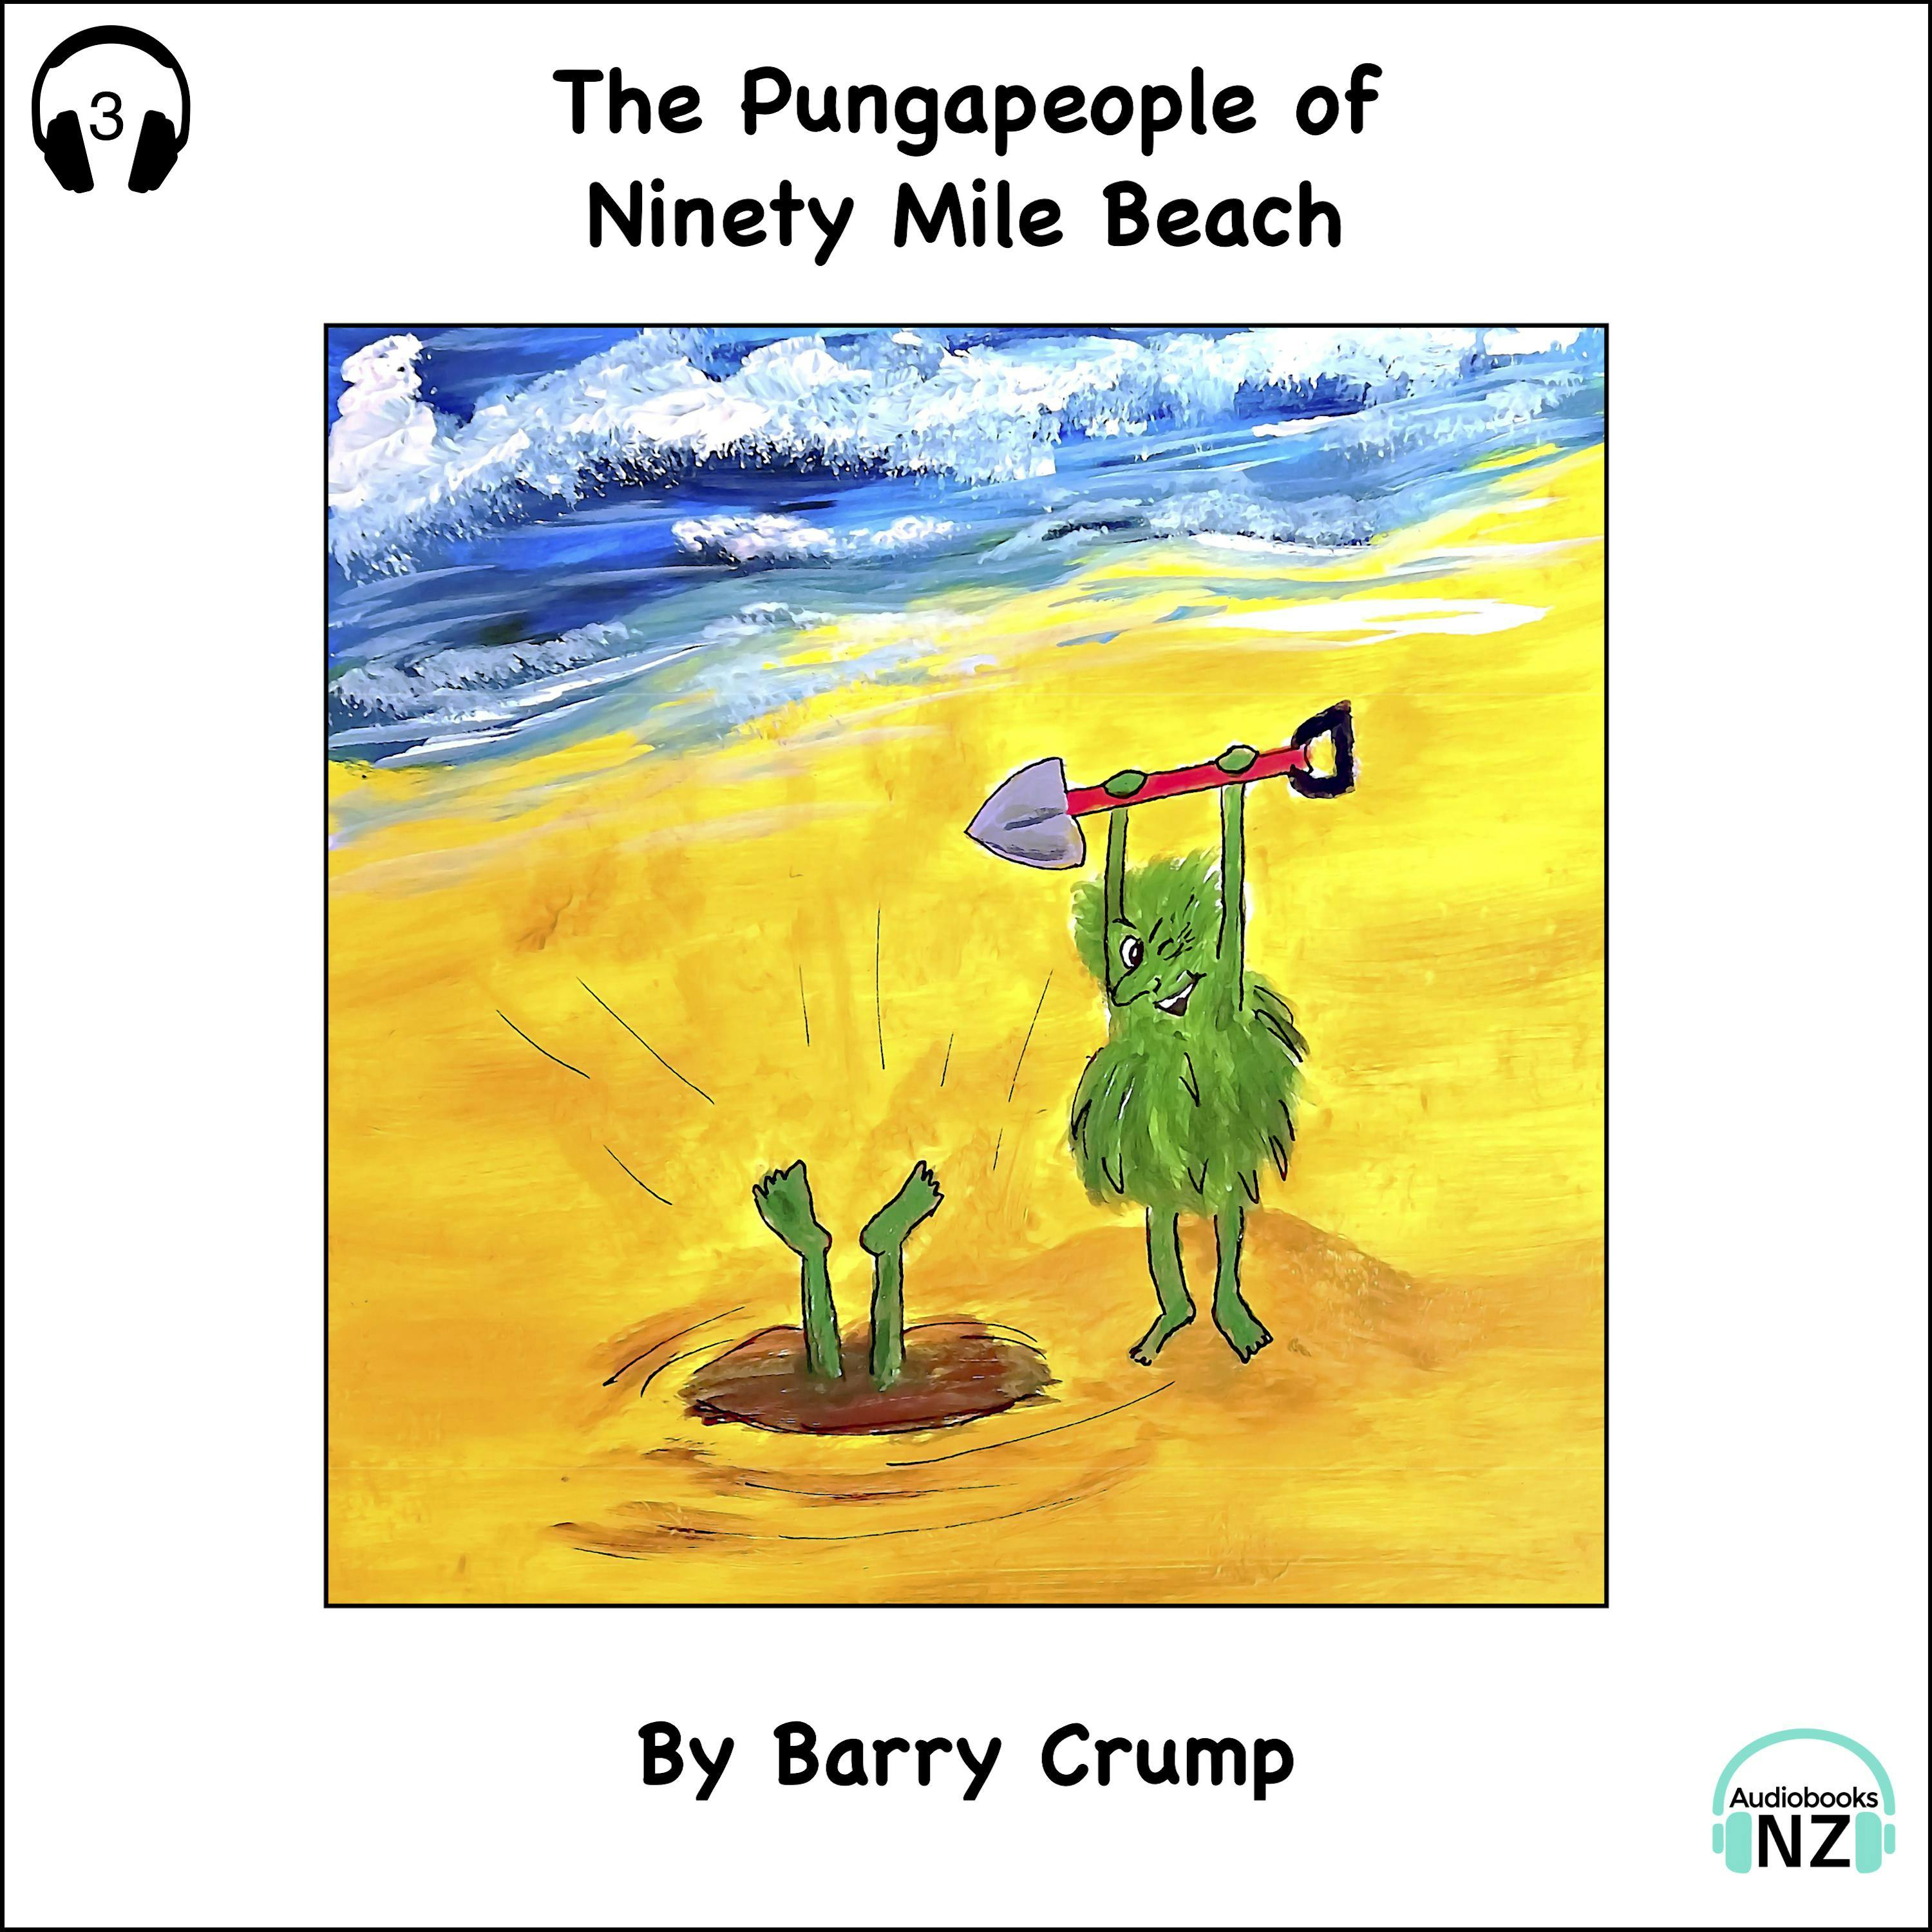 The Pungapeople of Ninety Mile Beach: A Barry Crump Classic - Barry Crump